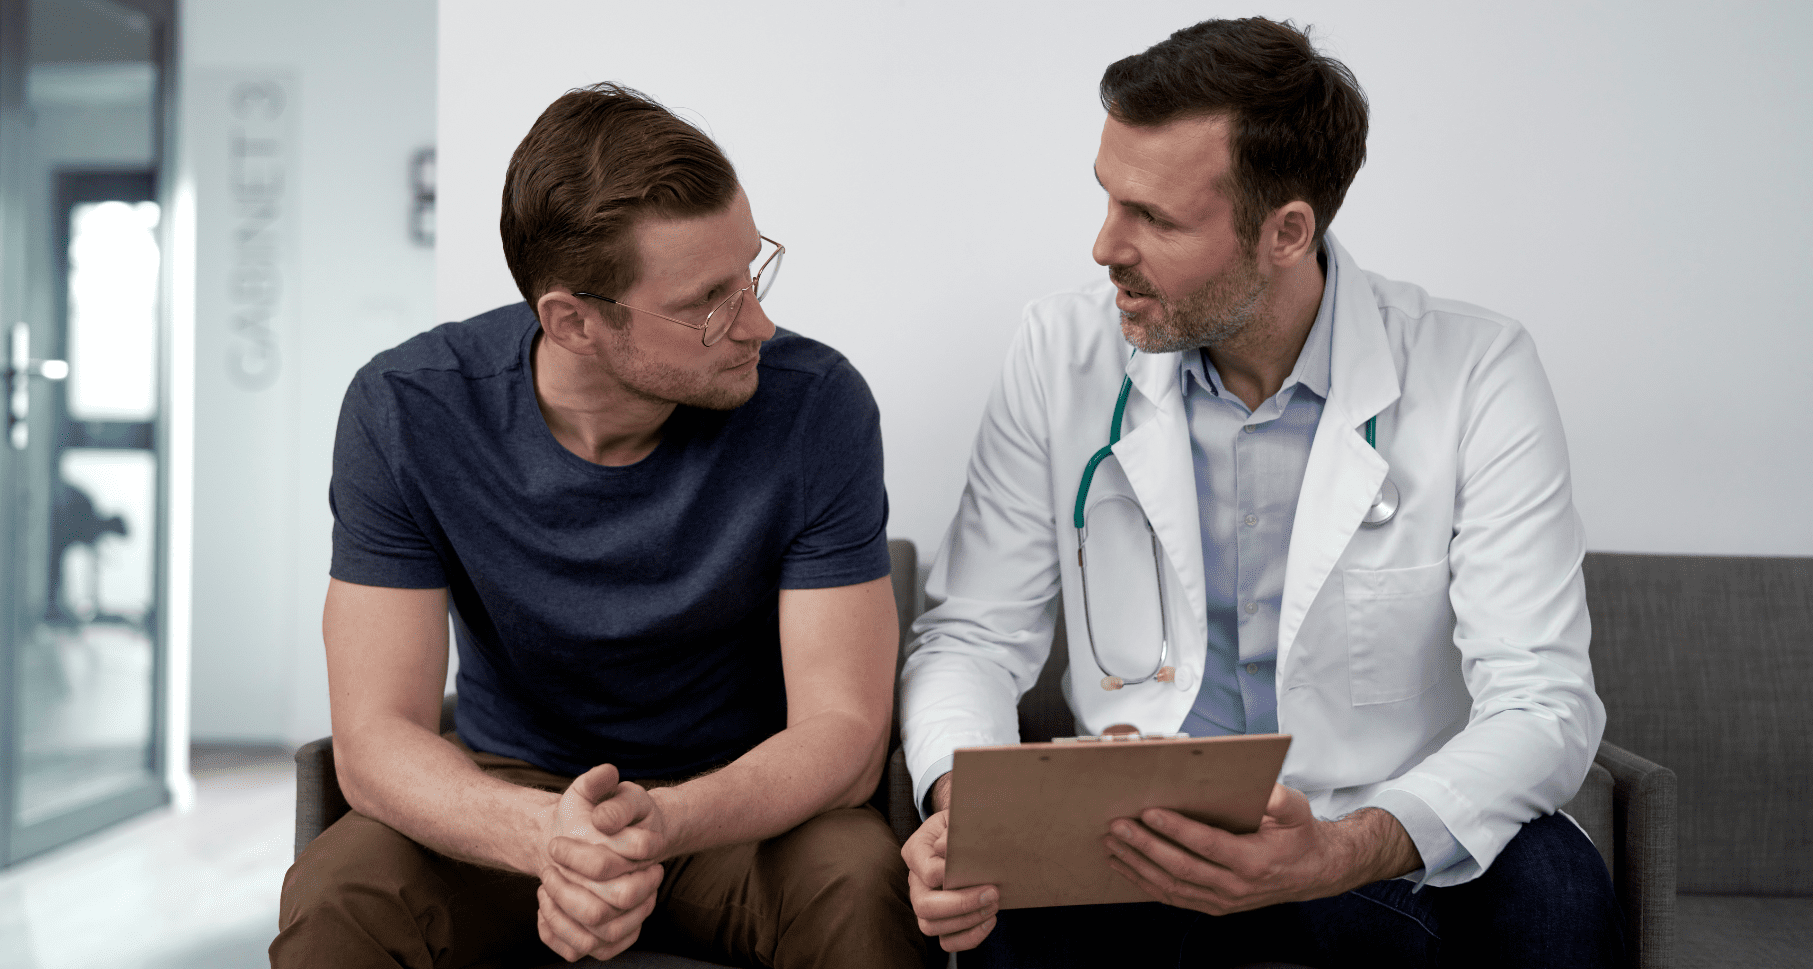 A patient talking to doctor